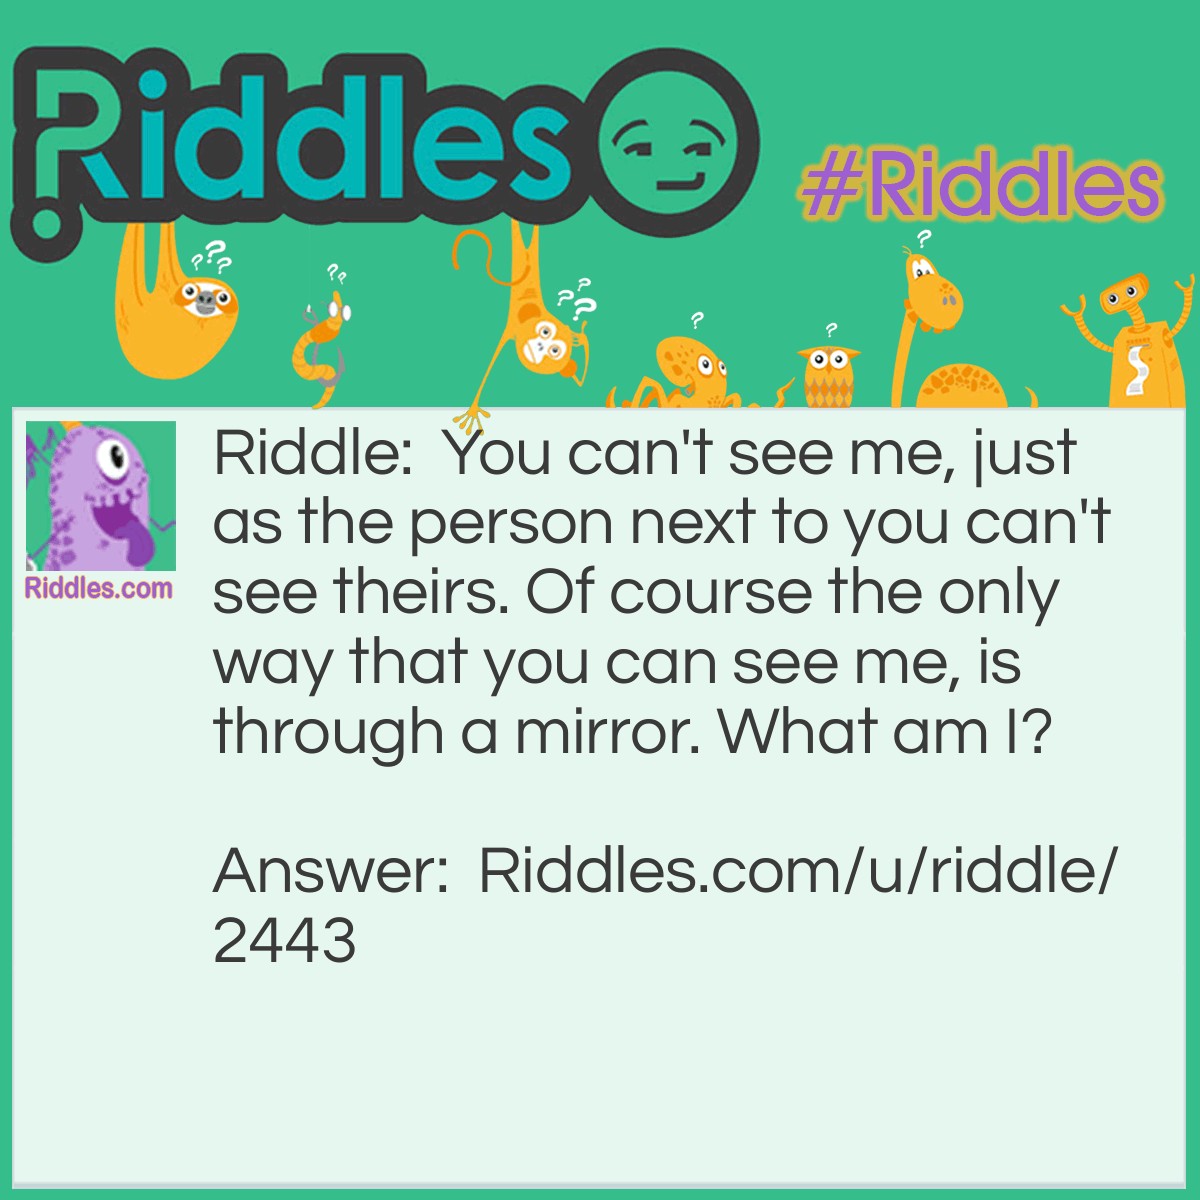 Riddle: You can't see me, just as the person next to you can't see theirs. Of course the only way that you can see me, is through a mirror. What am I? Answer: I'm your reflection.